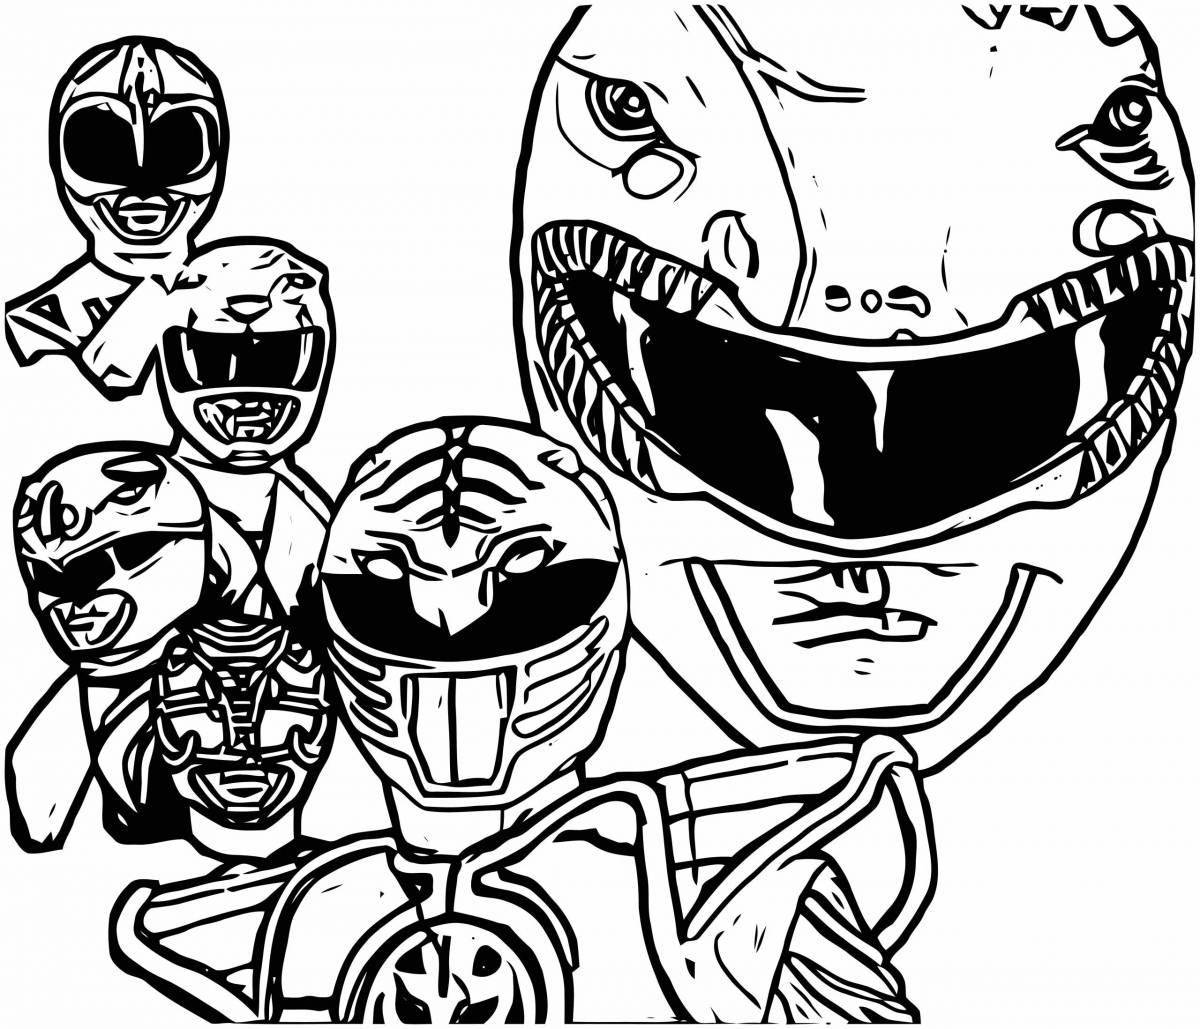 Awesome roger ranger coloring page